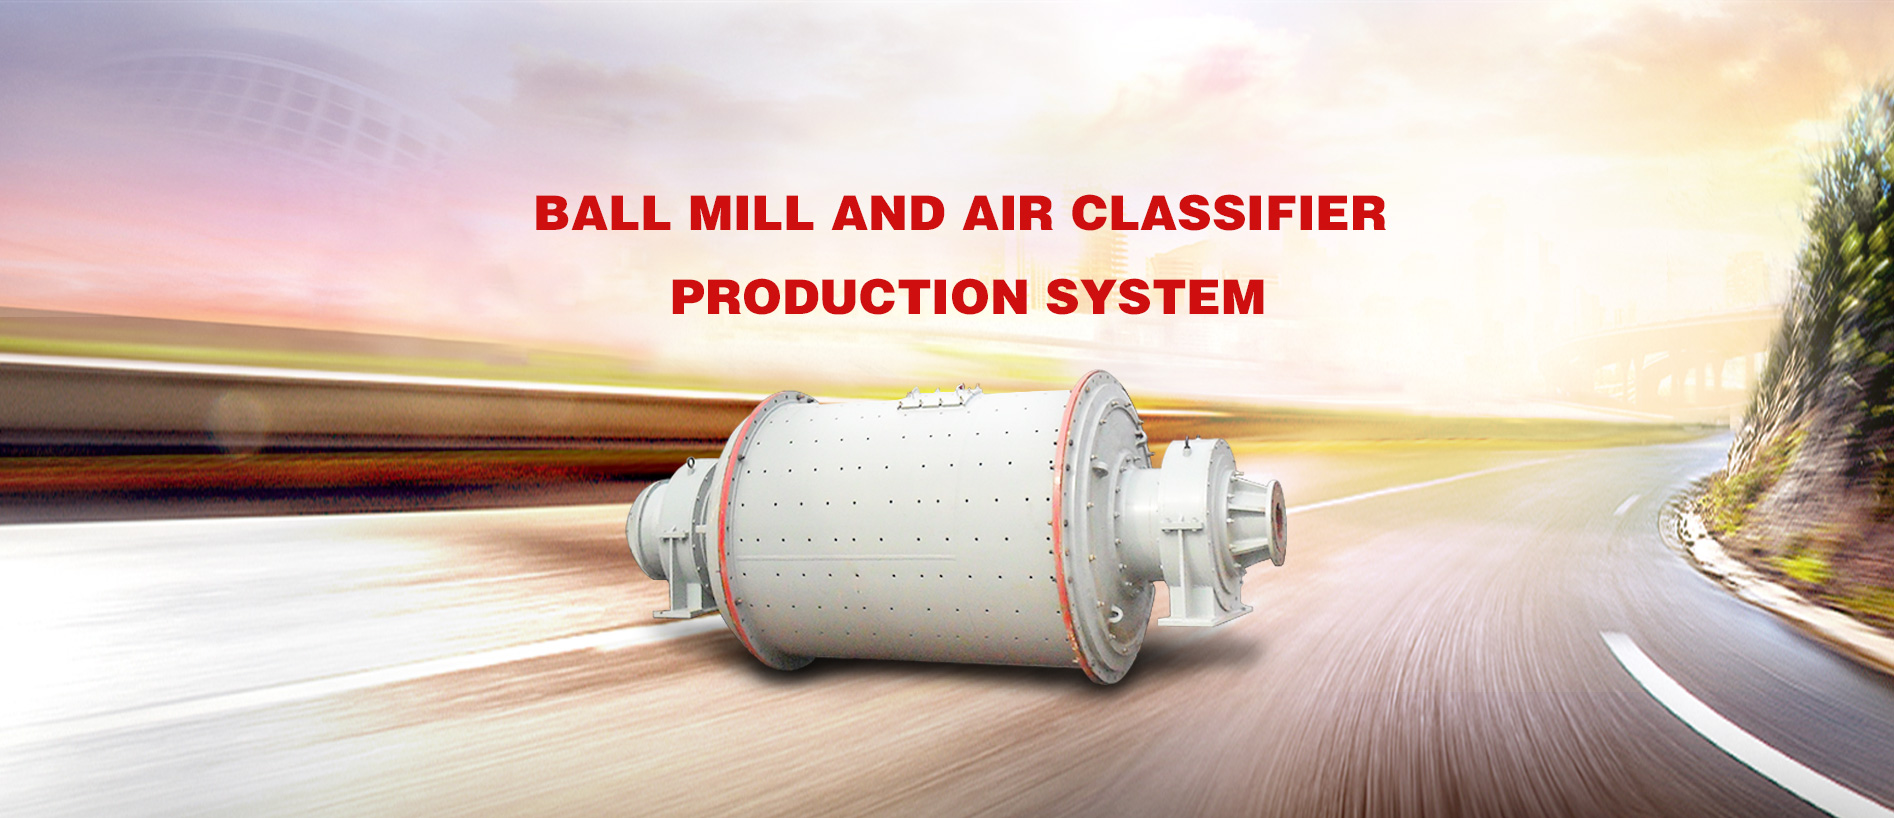 BALL MILL AND AIR CLASSIFIER PRODUCTION SYSTEM